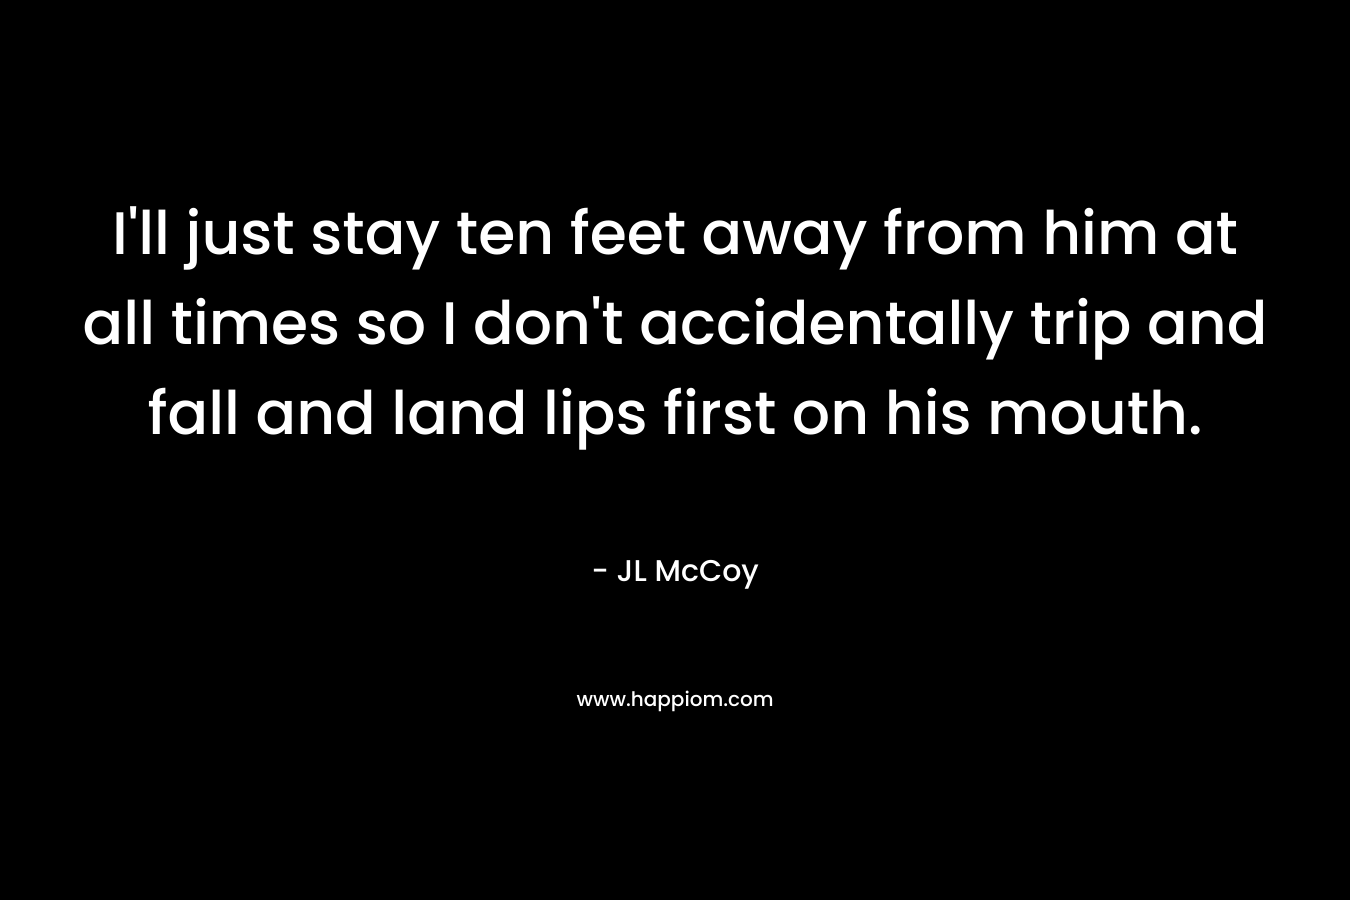 I’ll just stay ten feet away from him at all times so I don’t accidentally trip and fall and land lips first on his mouth. – JL McCoy